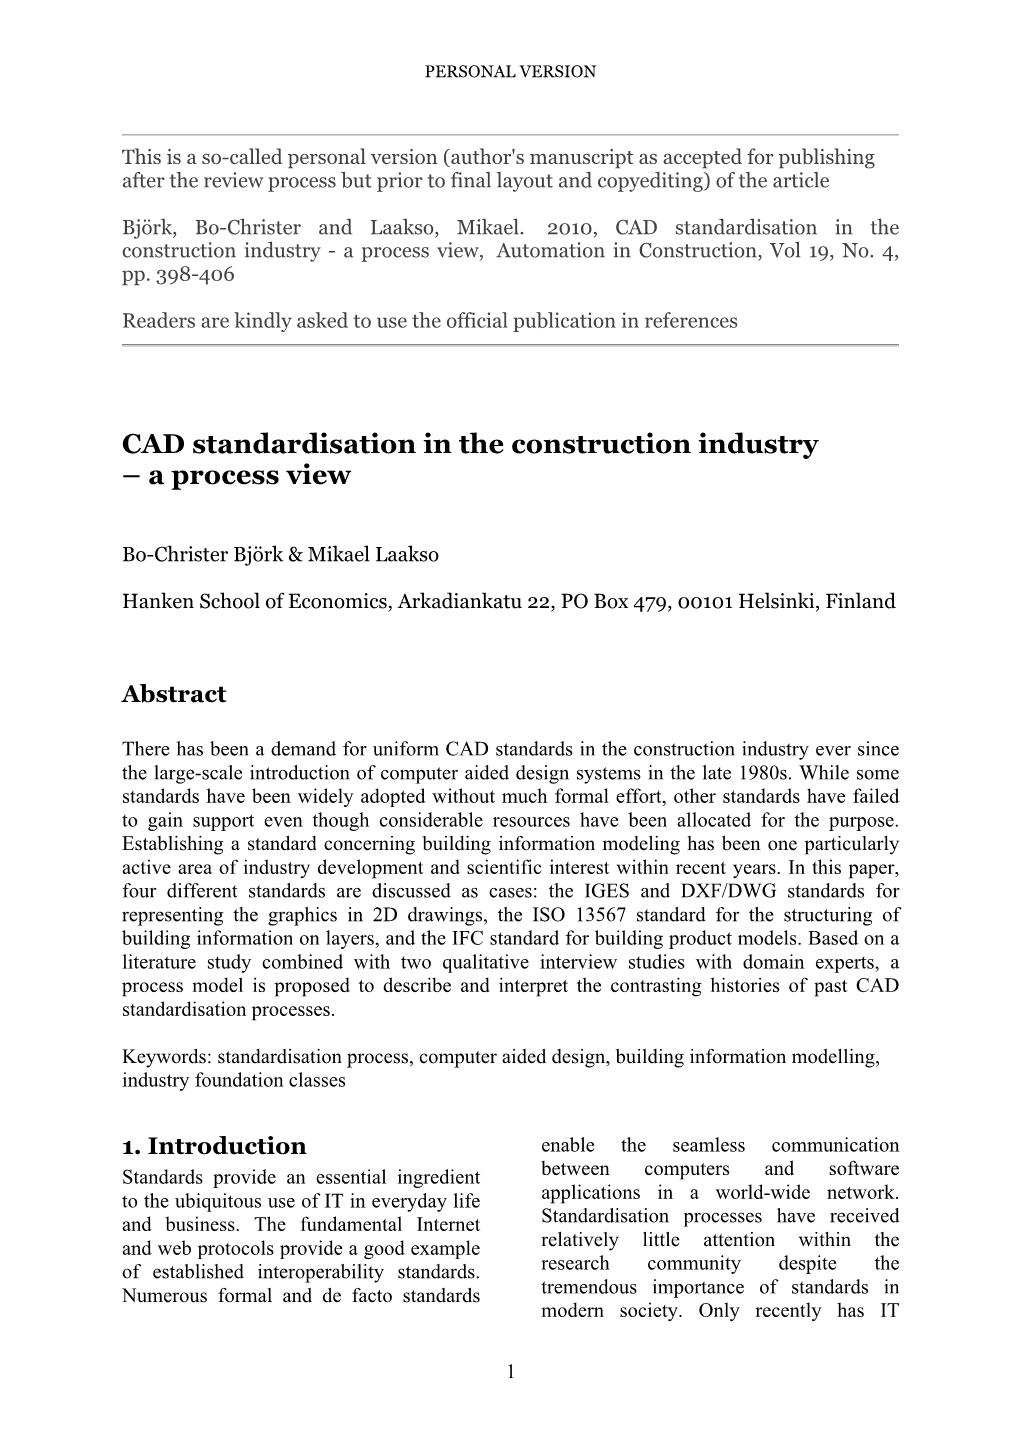 CAD Standardisation in the Construction Industry - a Process View, Automation in Construction, Vol 19, No